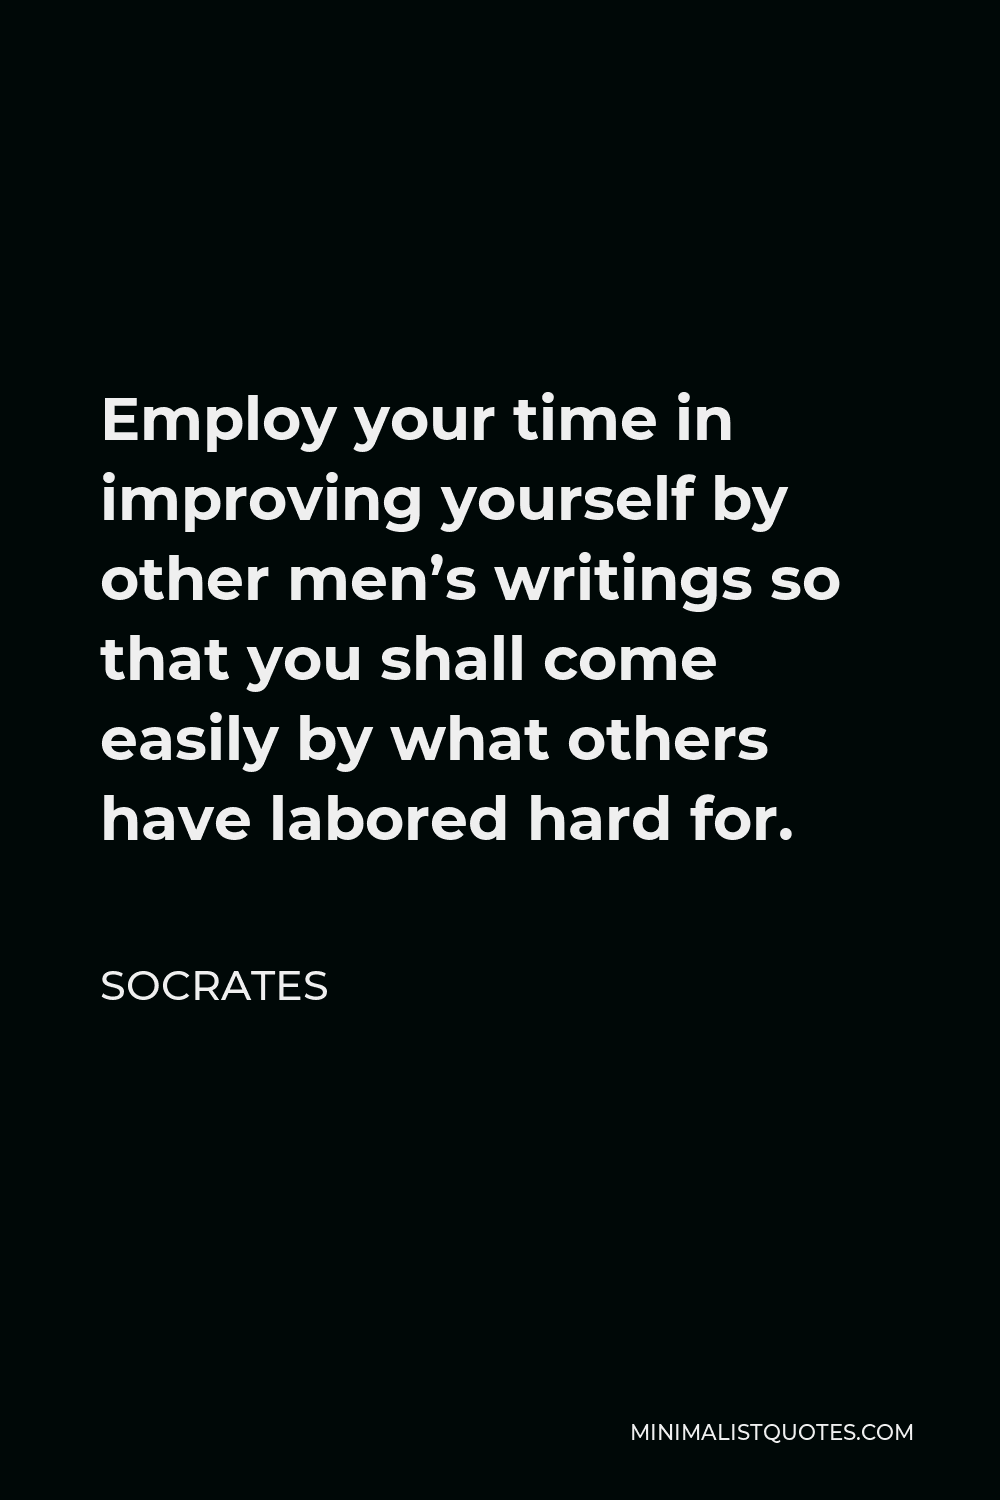 Socrates Quote - Employ your time in improving yourself by other men’s writings so that you shall come easily by what others have labored hard for.